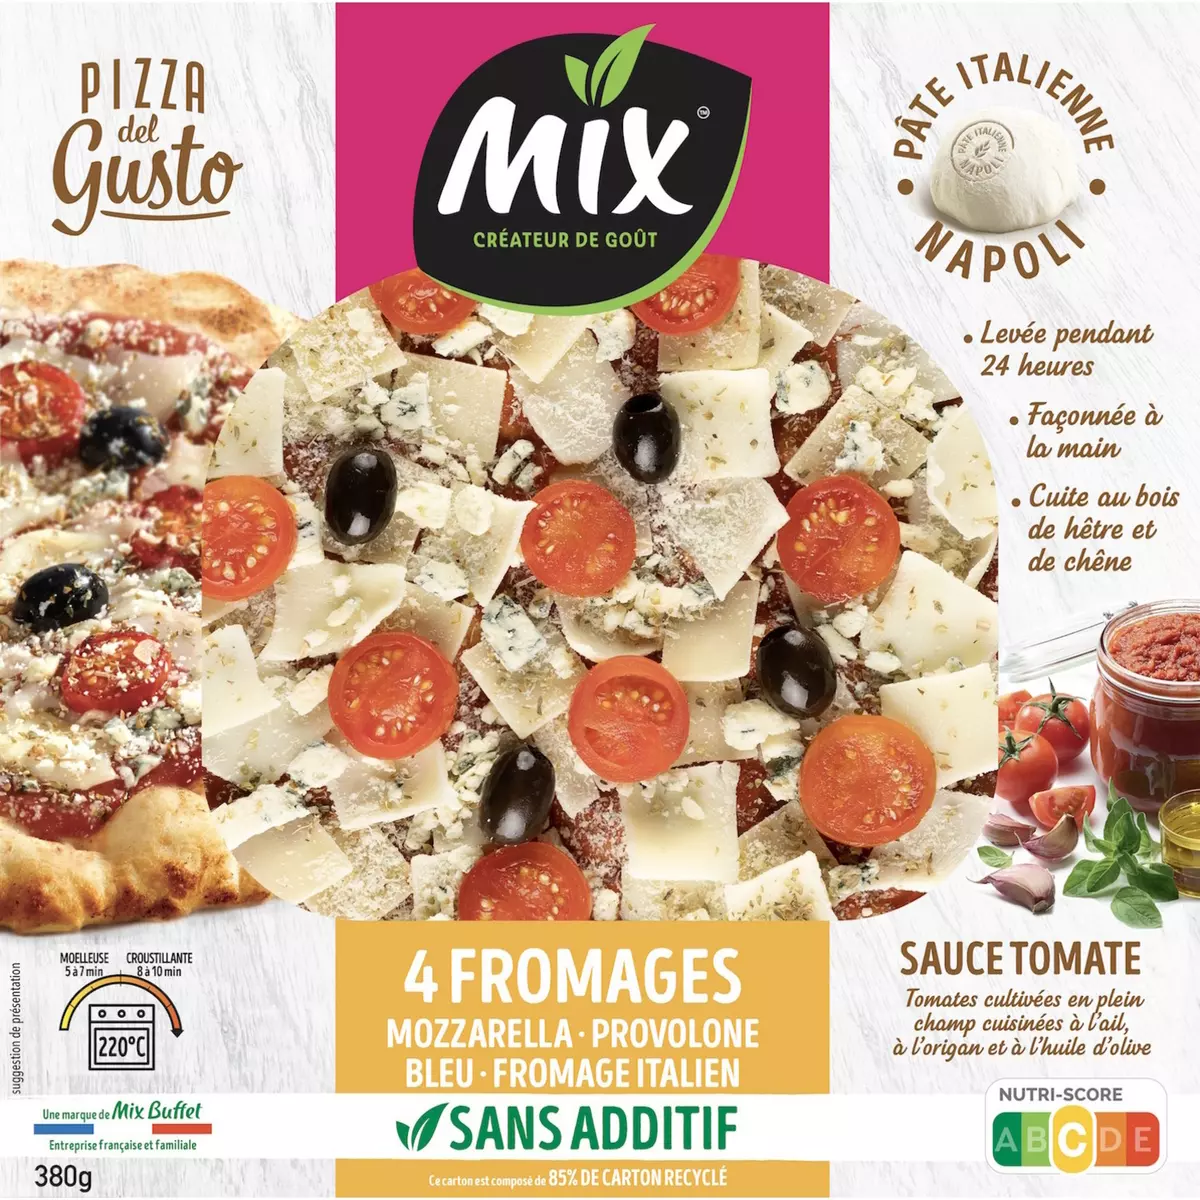 MIX Pizza del gusto 4 fromages mozzarella provolone bleu fromage italien sauce tomate à partager 380g